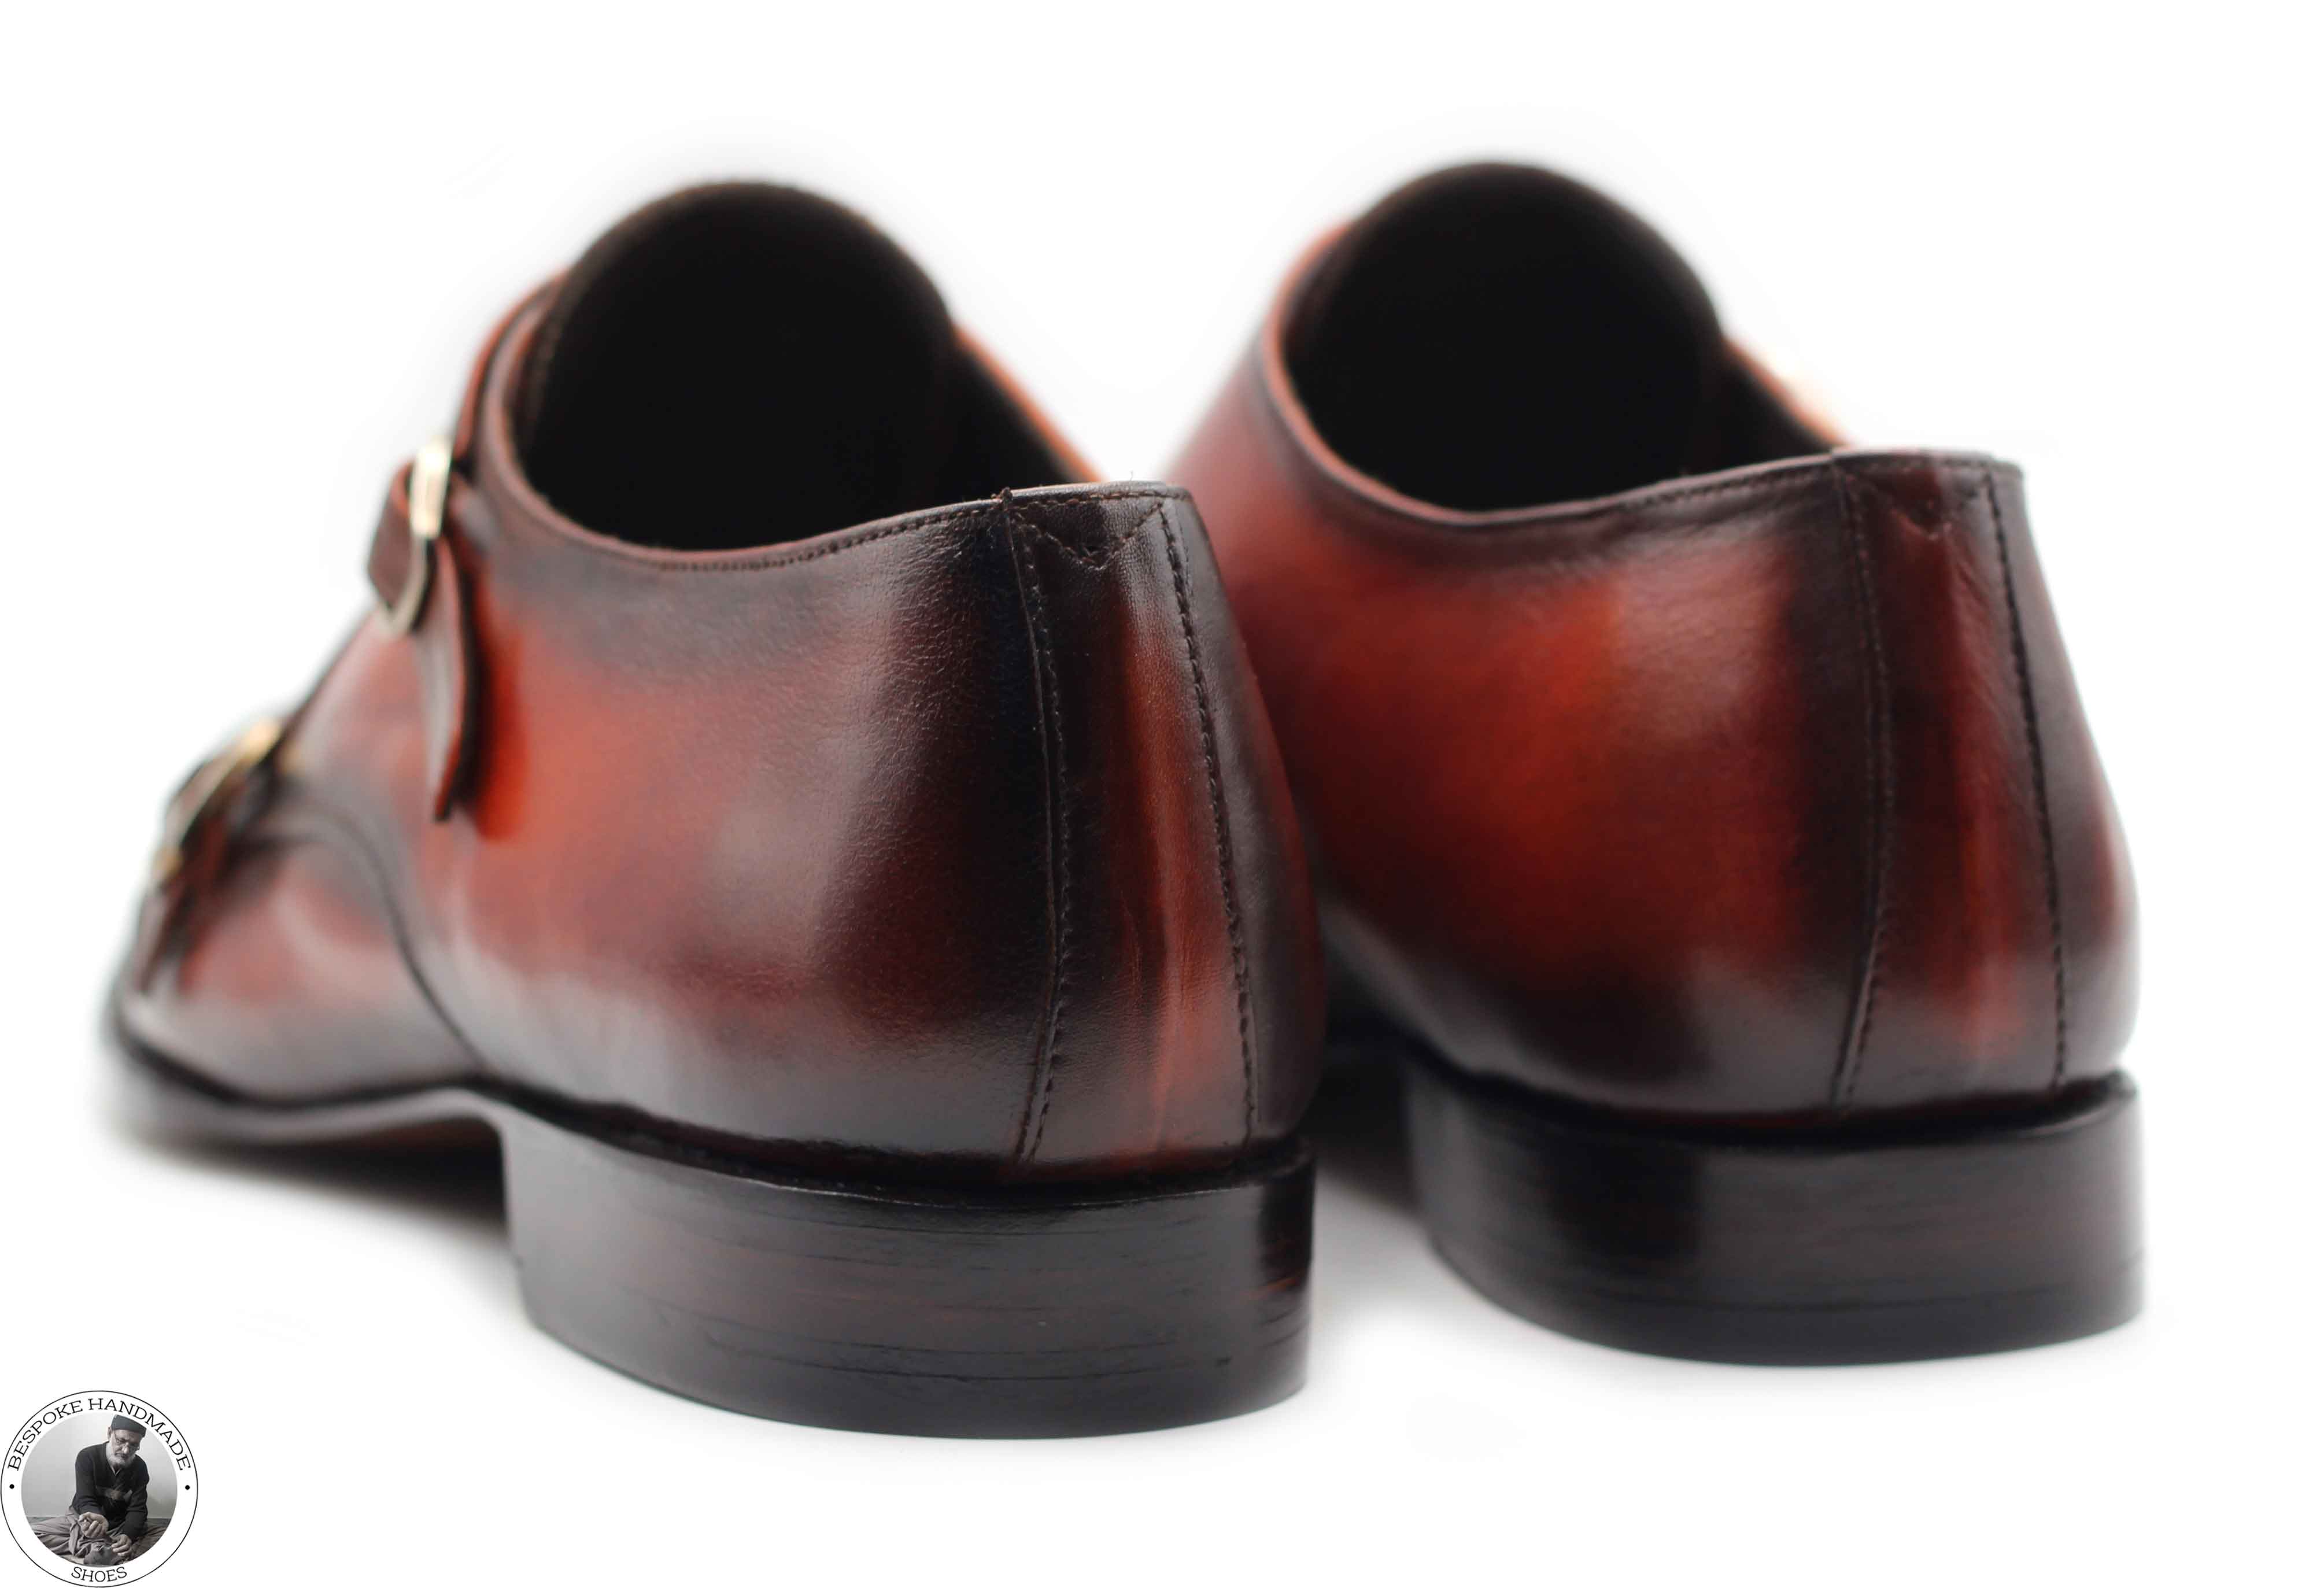 Bespoke Men's Handmade Red Leather Black Shaded Double Monk Strap Casual Shoes For Men's